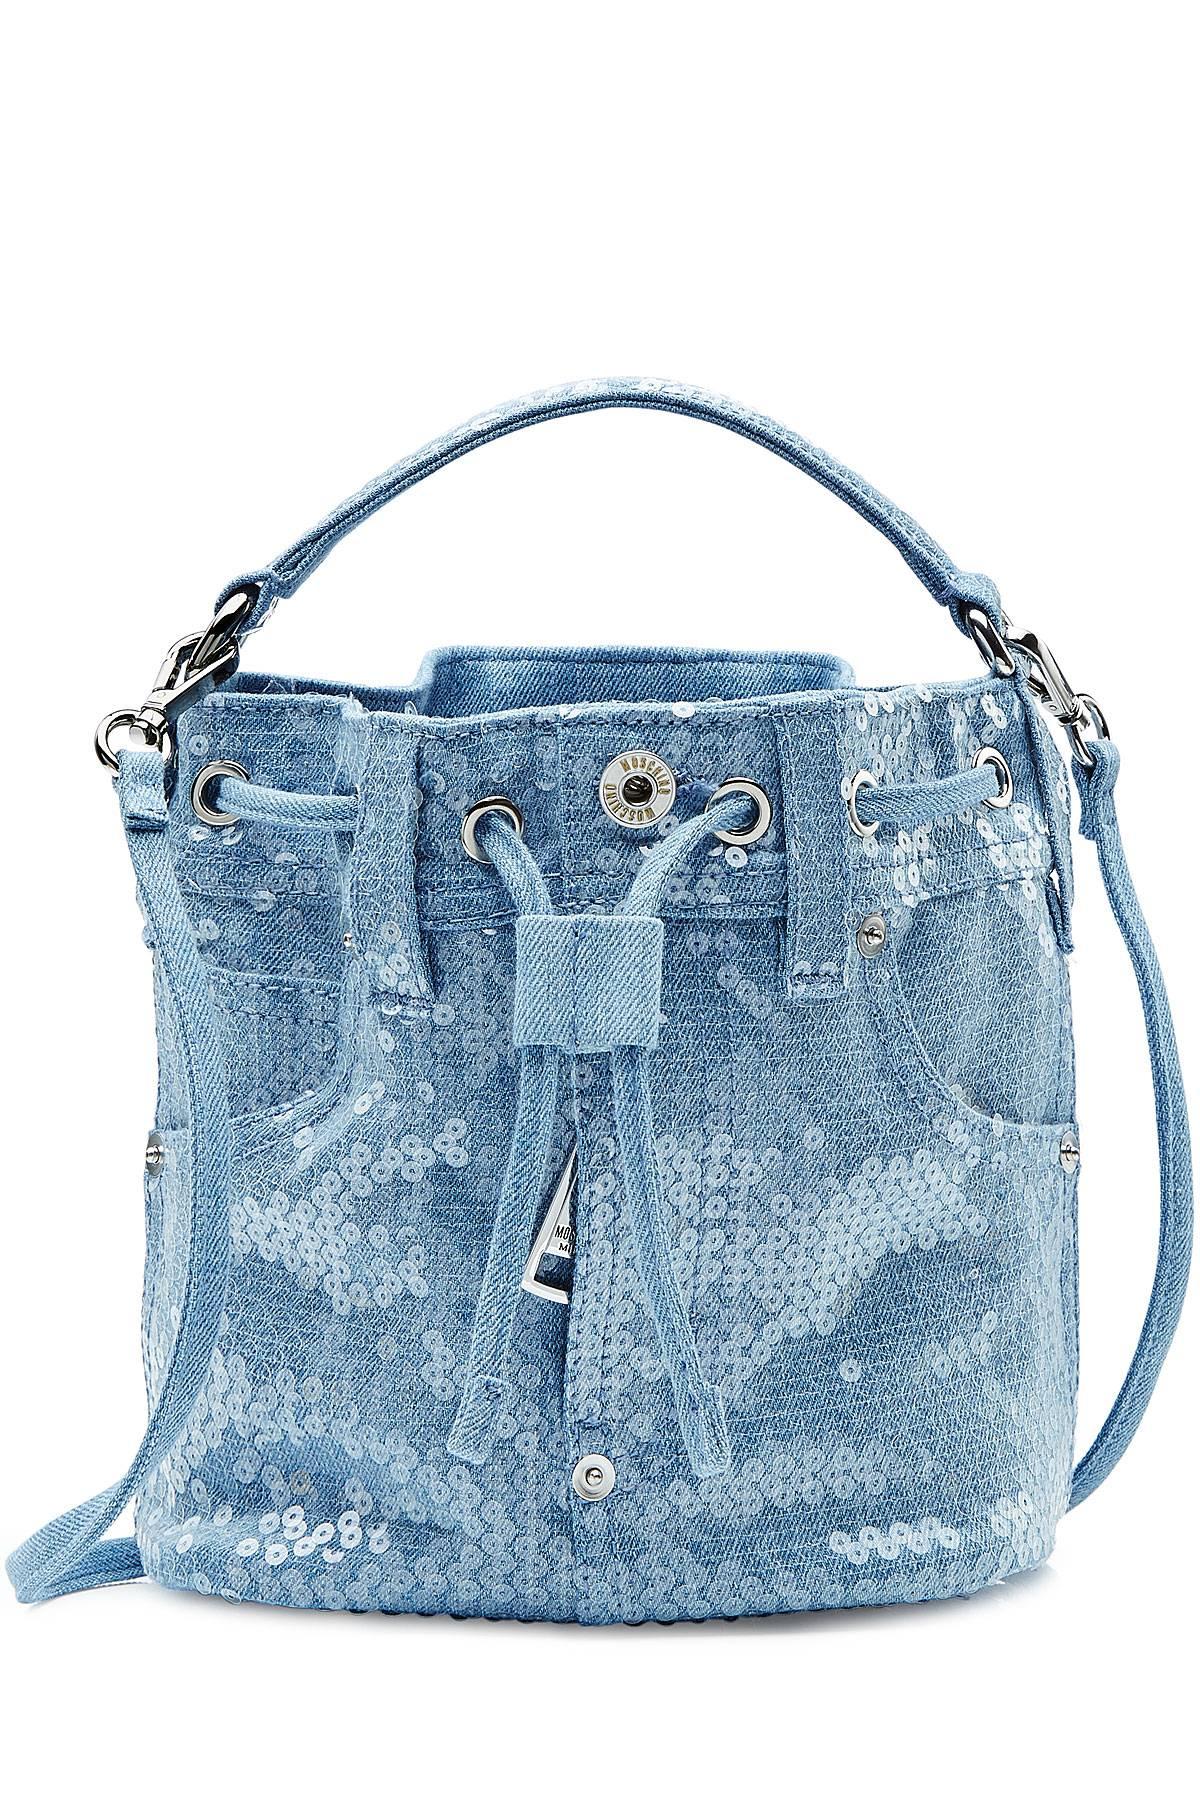 Moschino Denim Bucket Bag with Sequins NWOT

Totally made in italy 

Model: 2A7519 

Tasks on the back